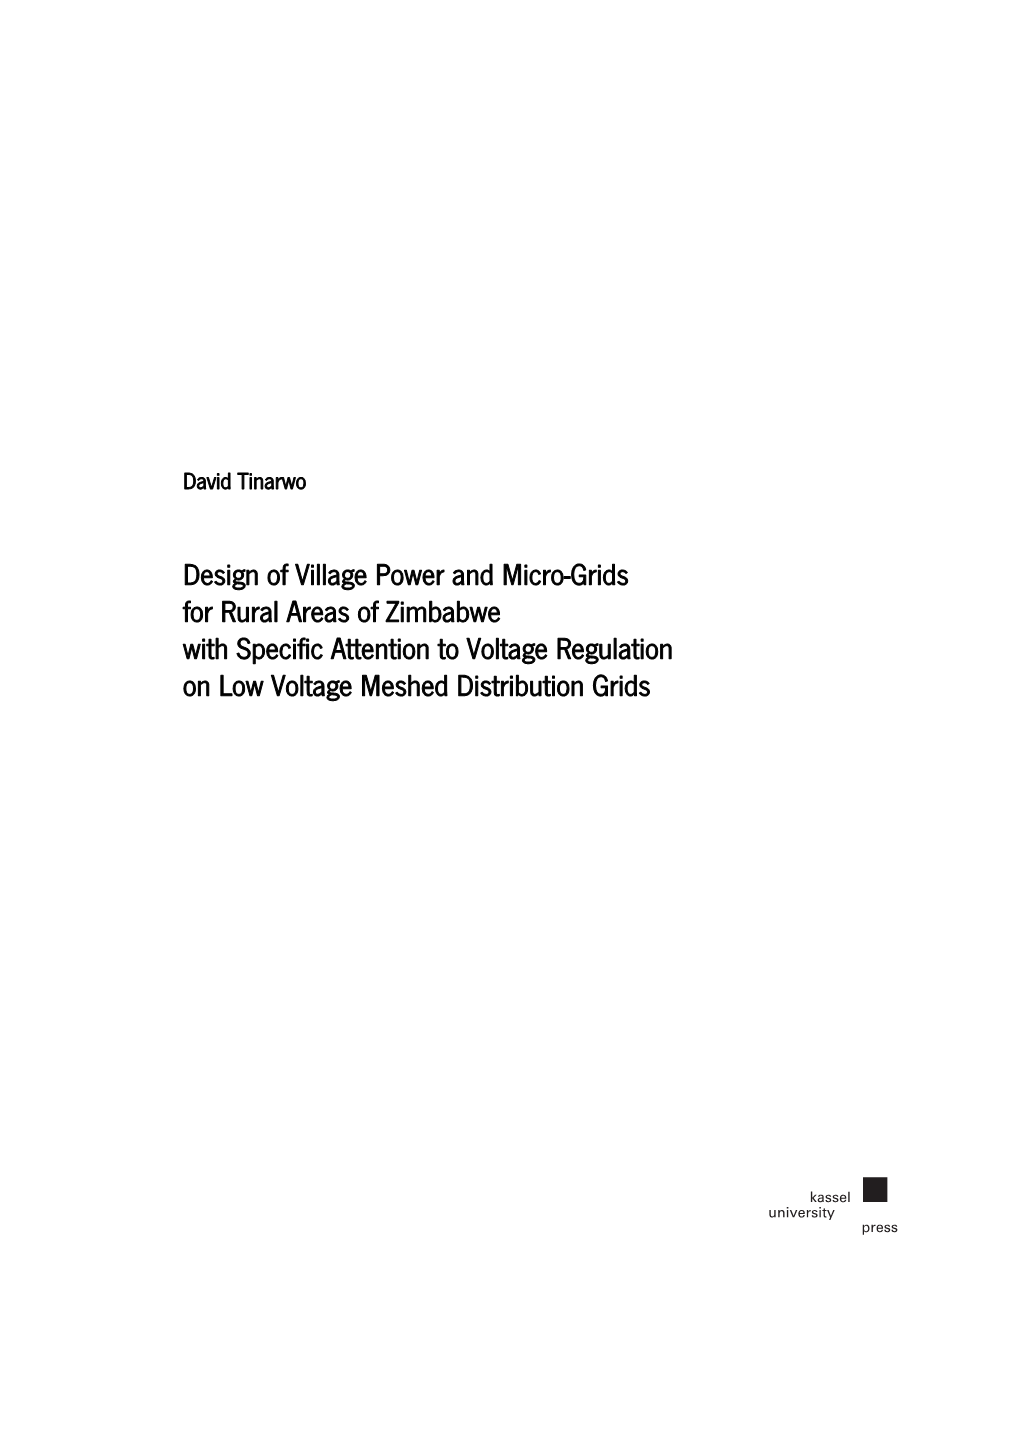 Design of Village Power and Micro-Grids for Rural Areas of Zimbabwe with Specific Attention to Voltage Regulation on Low Voltage Meshed Distribution Grids